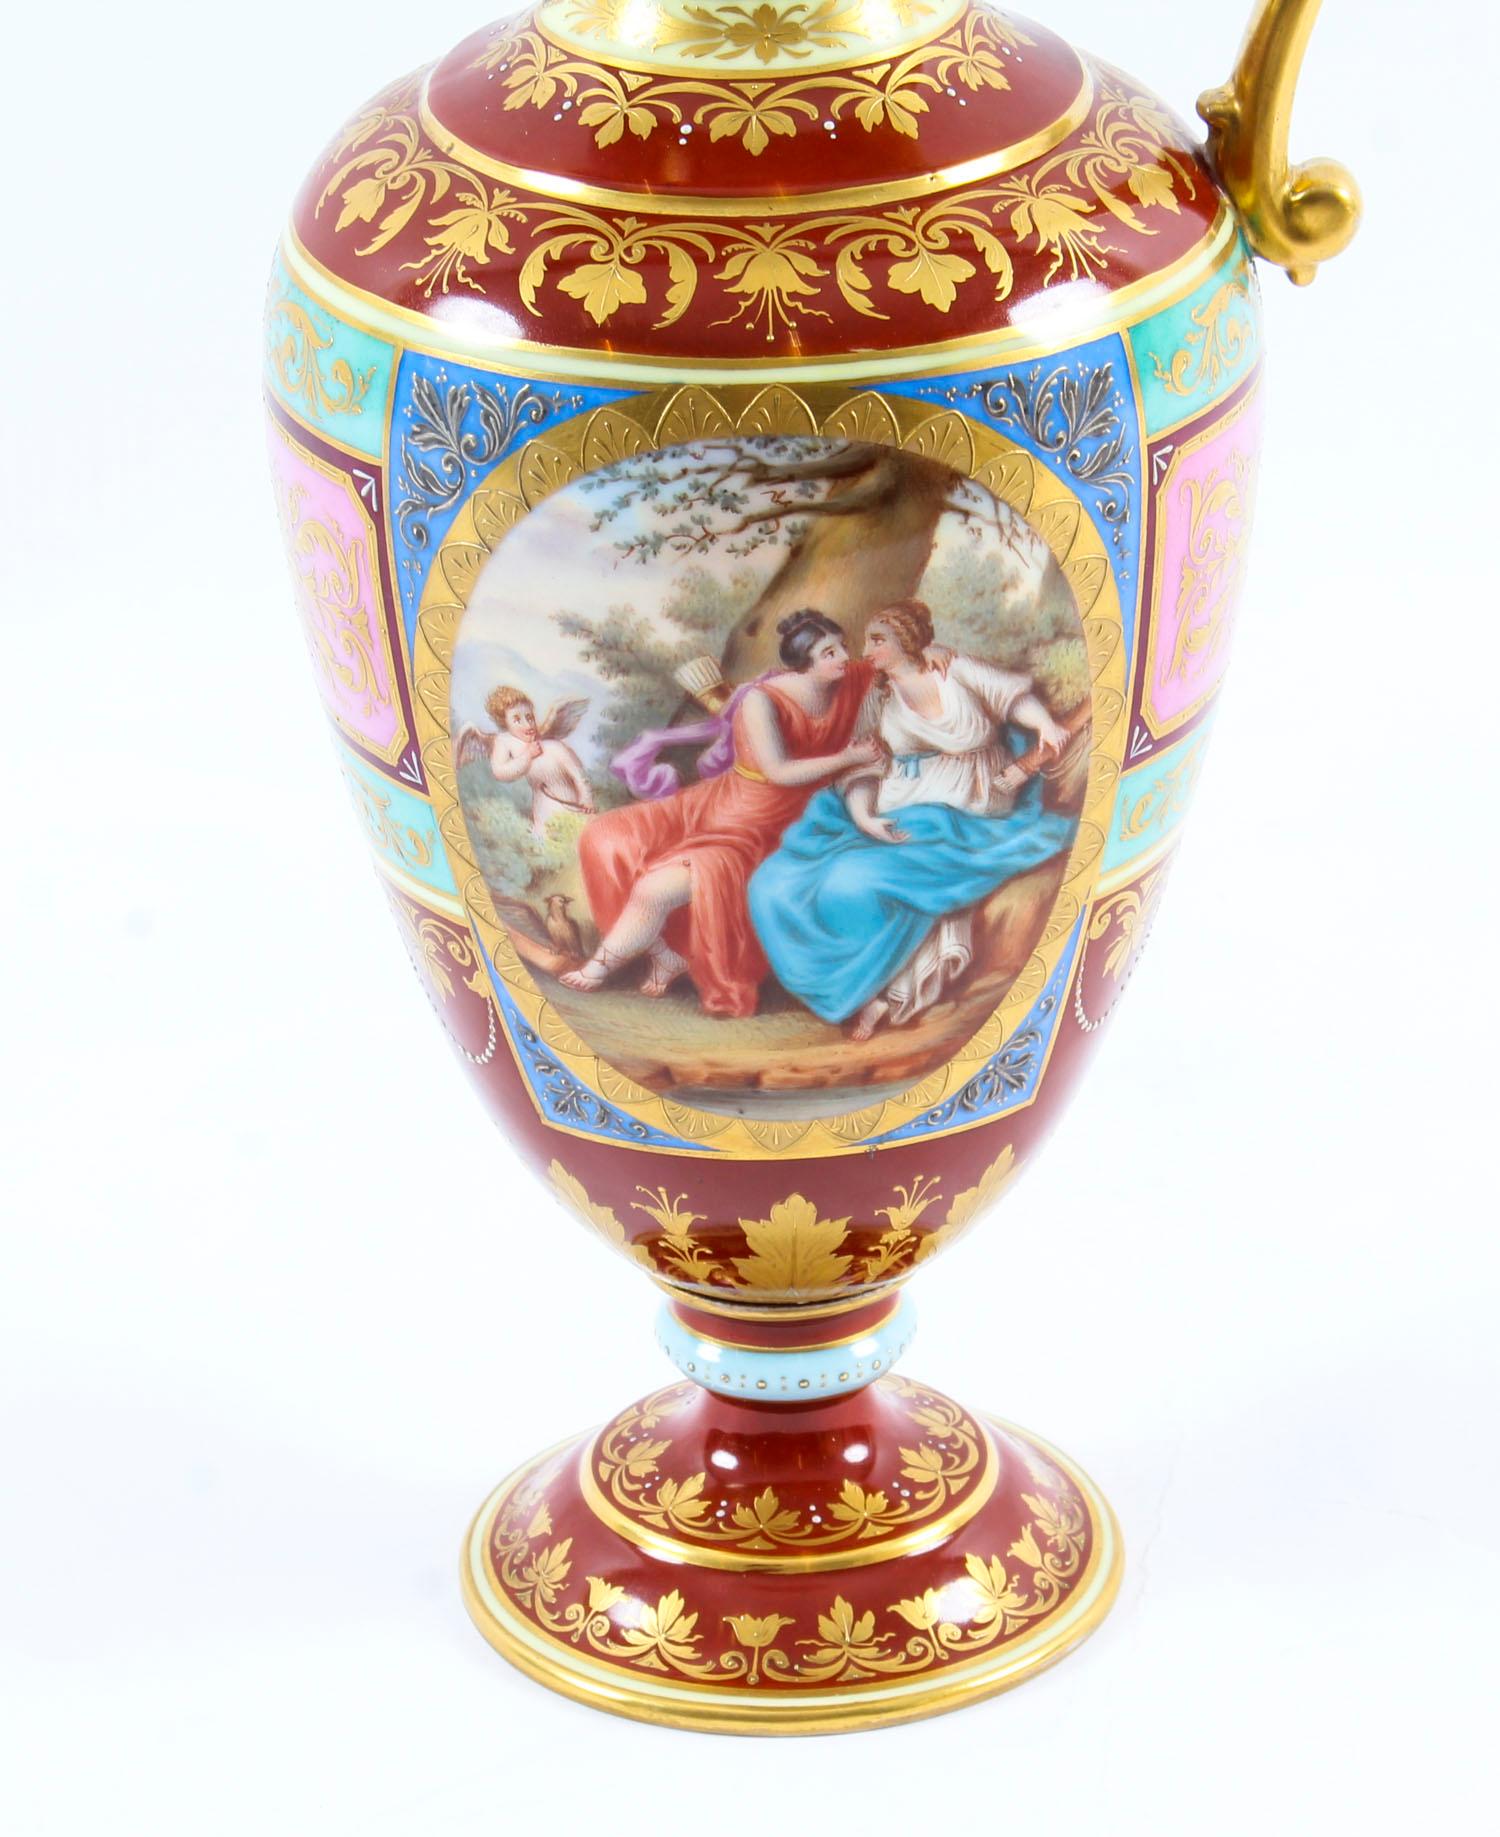 This is a stunning and rare antique Royal Vienna Porcelain ewer, dating from the late 19th century.
 
Of baluster form with loop handle and beautifully painted with classical figures in landscape panels on a multi-colored paneled ground